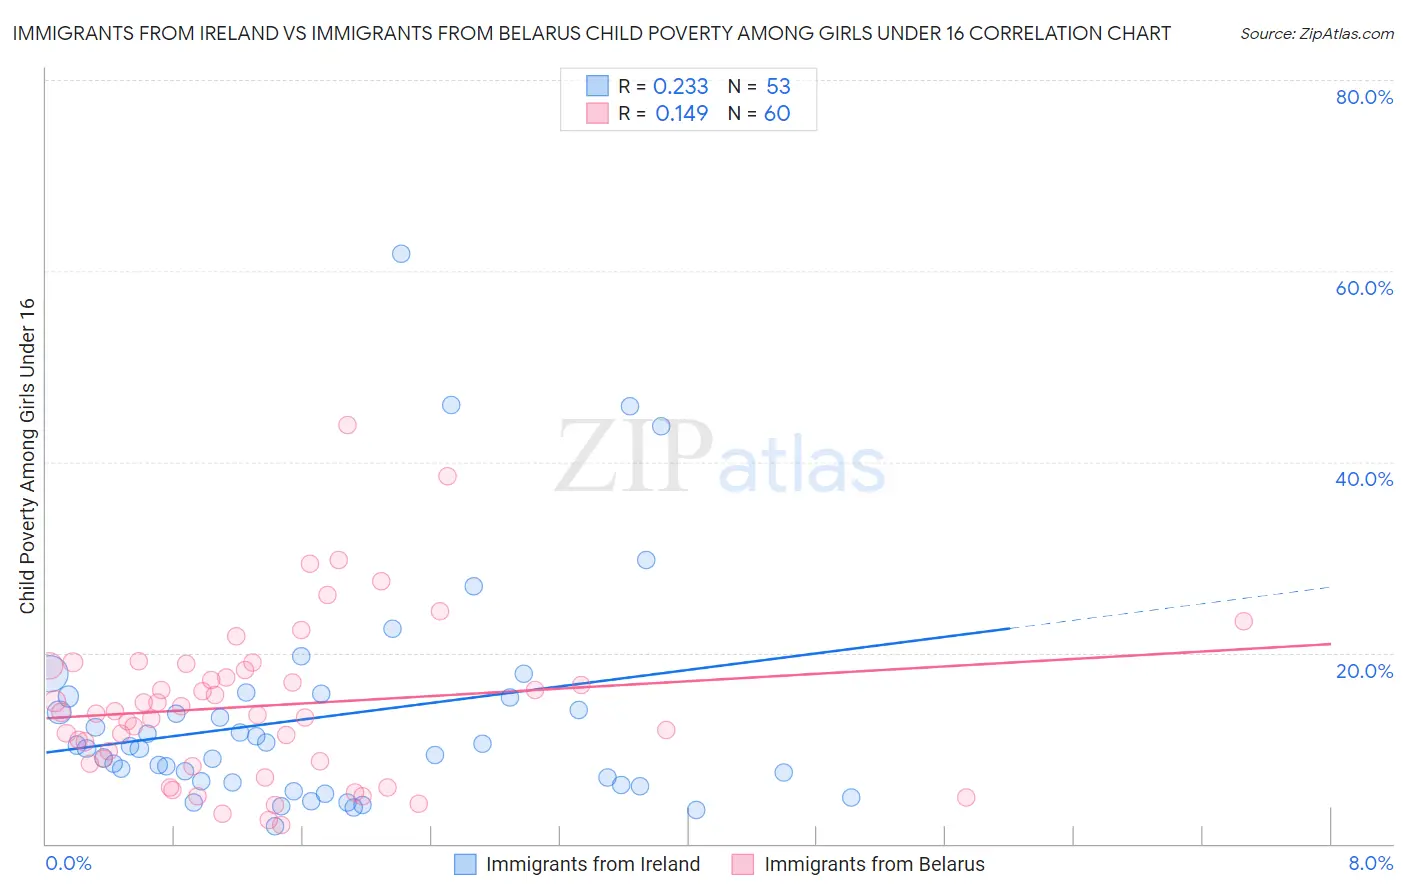 Immigrants from Ireland vs Immigrants from Belarus Child Poverty Among Girls Under 16